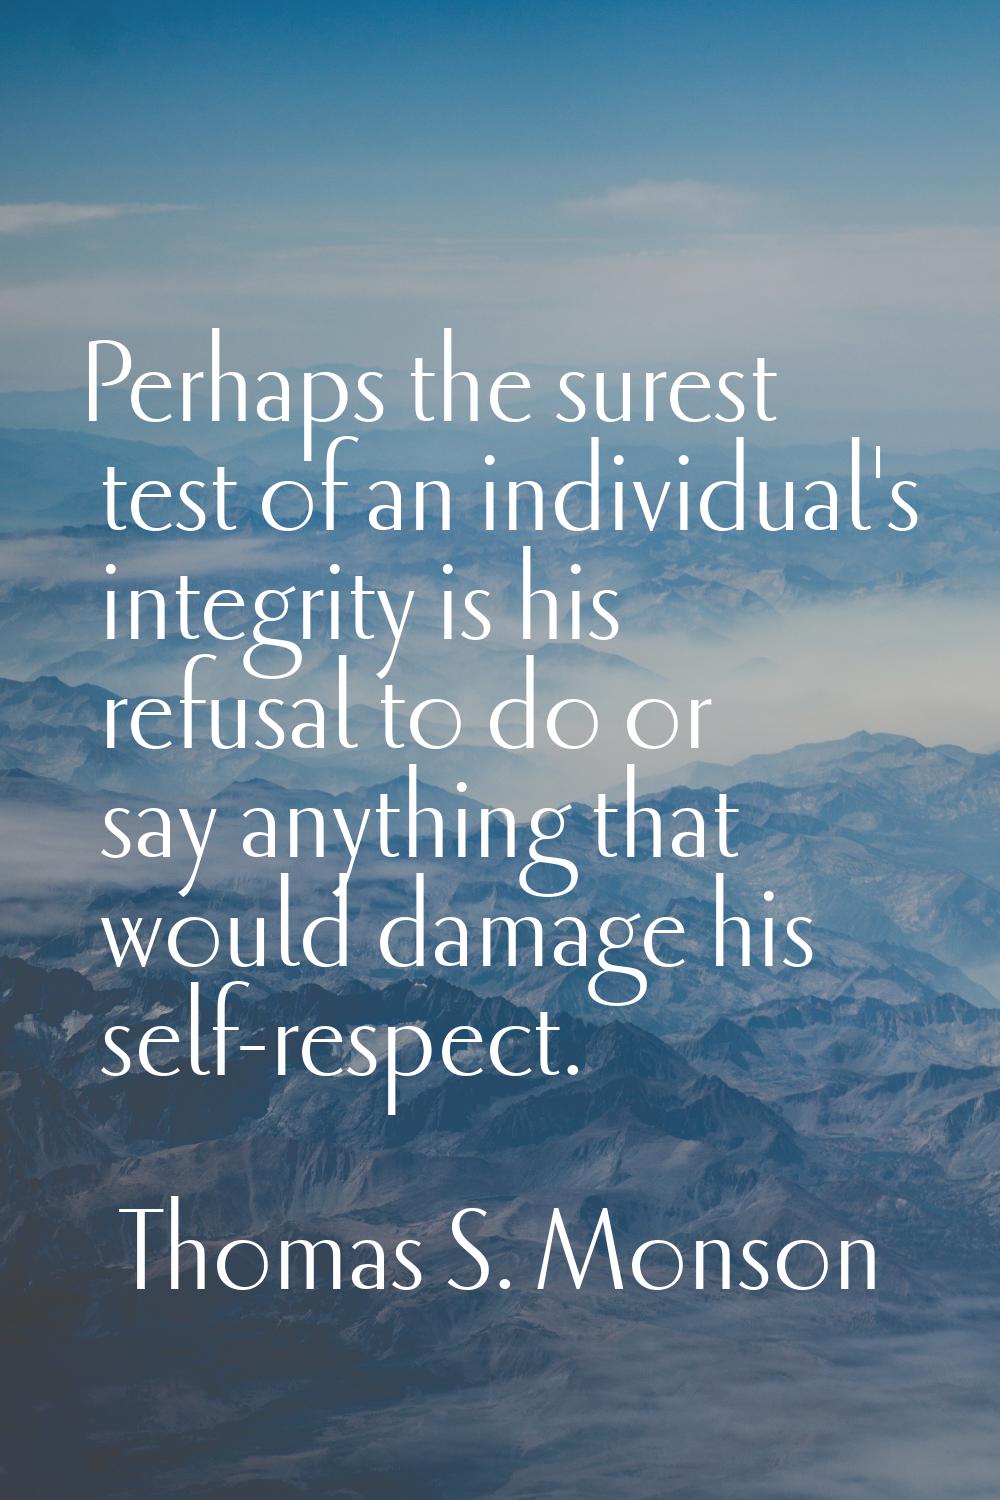 Perhaps the surest test of an individual's integrity is his refusal to do or say anything that woul